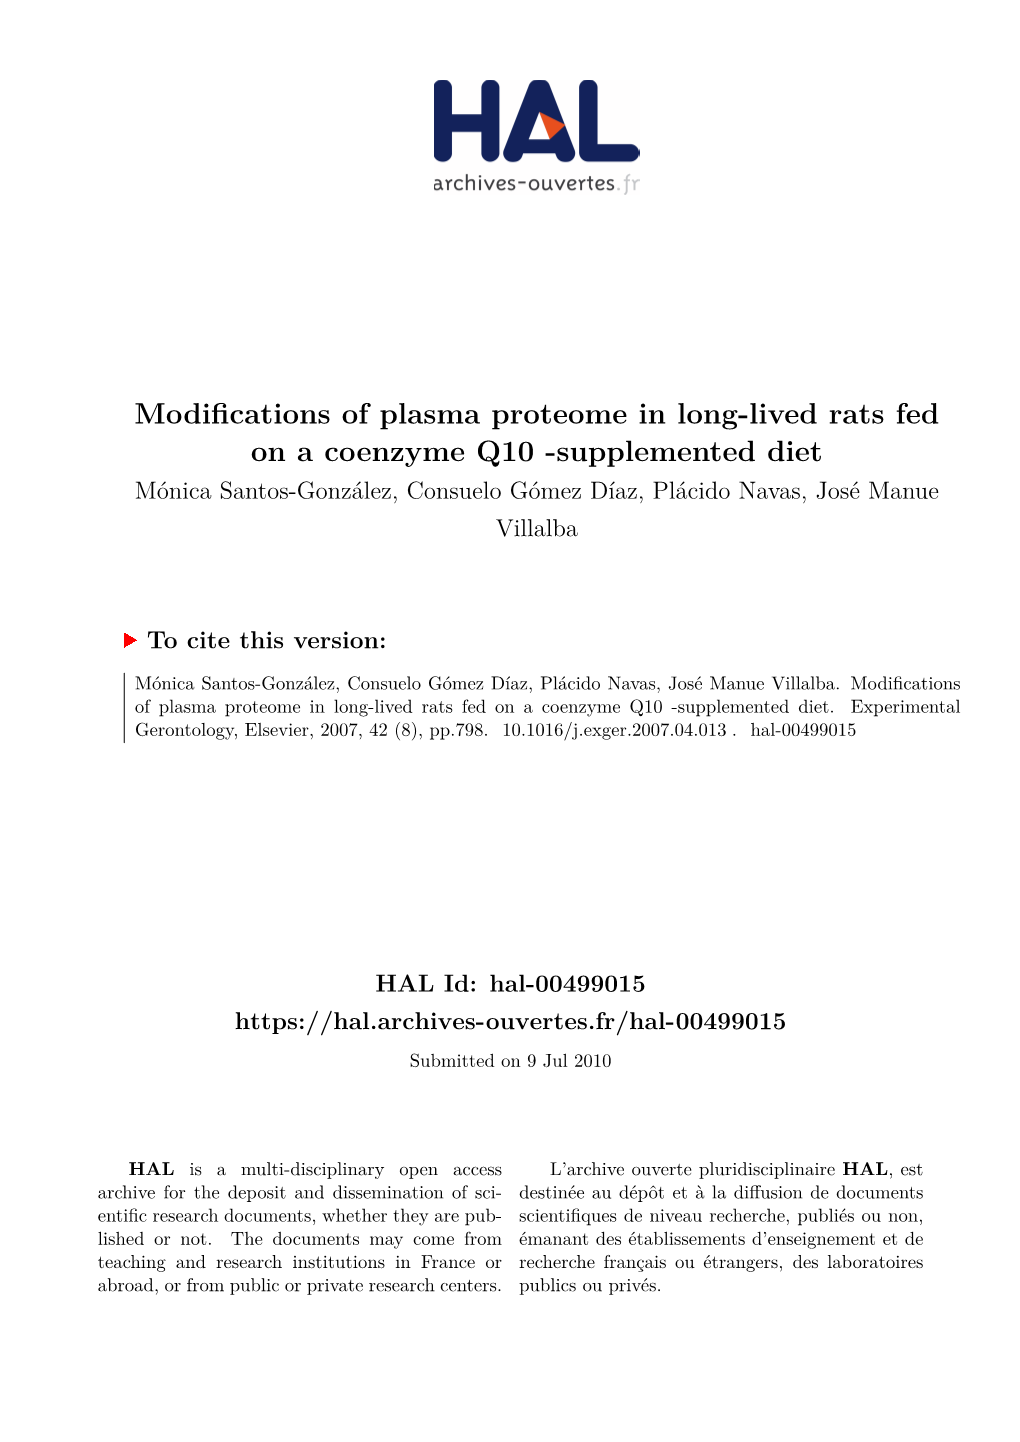 Modifications of Plasma Proteome in Long-Lived Rats Fed on a Coenzyme